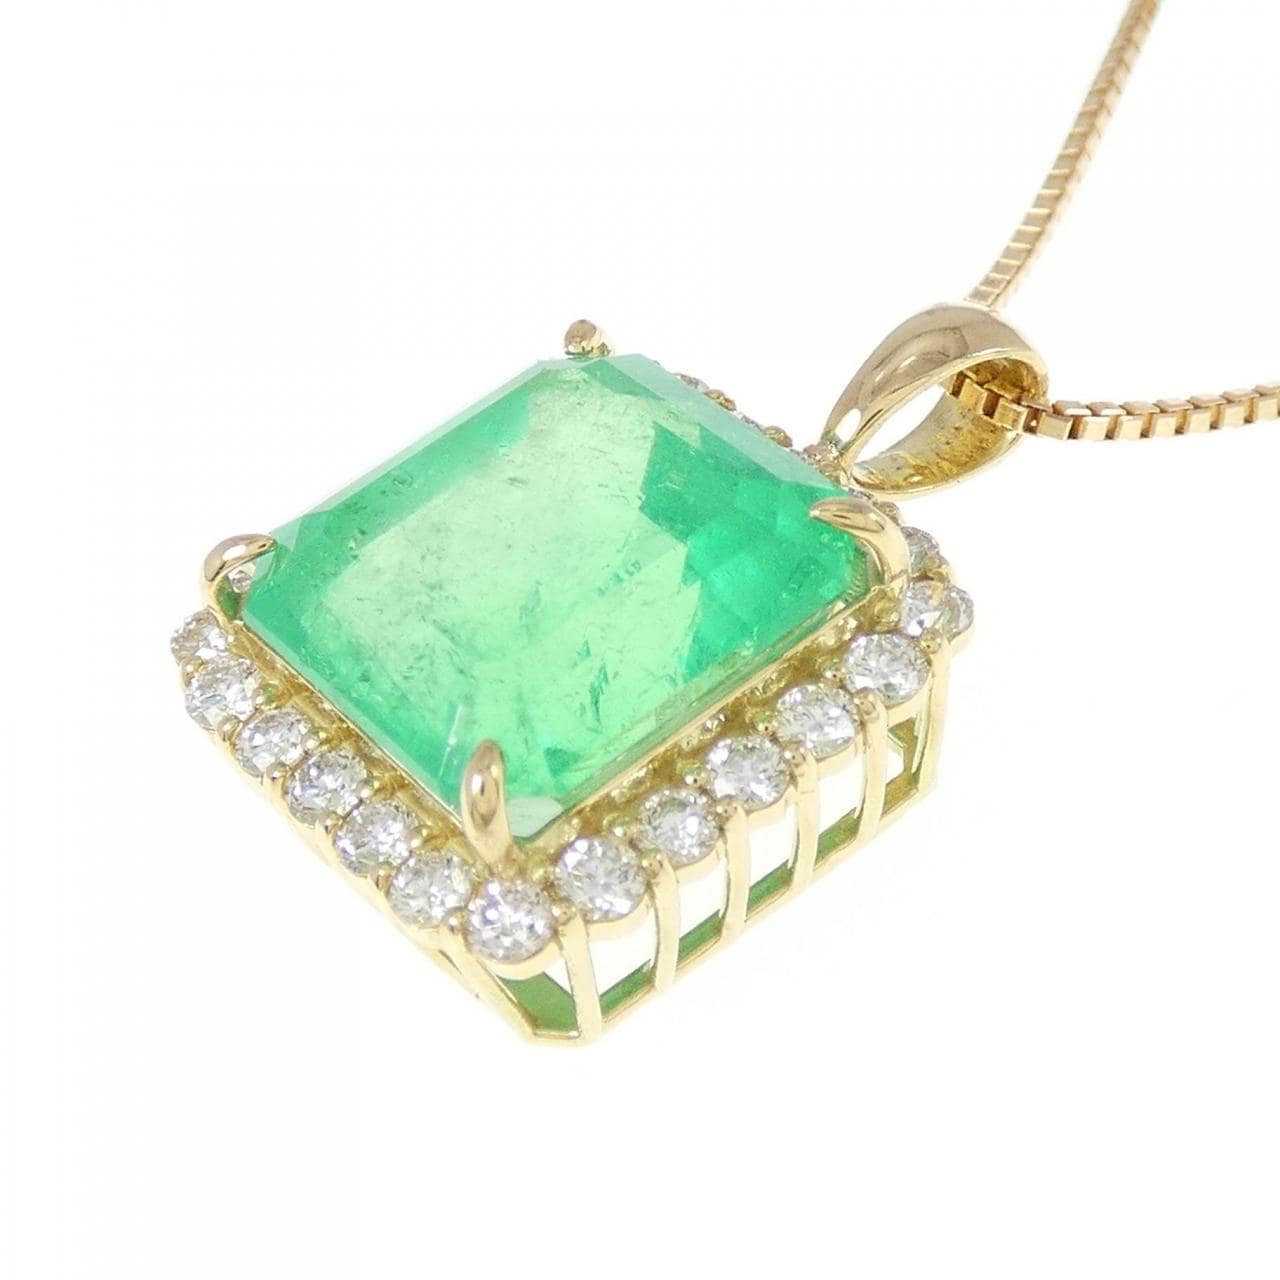 [Remake] K18YG emerald necklace 10.41CT Made in Colombia